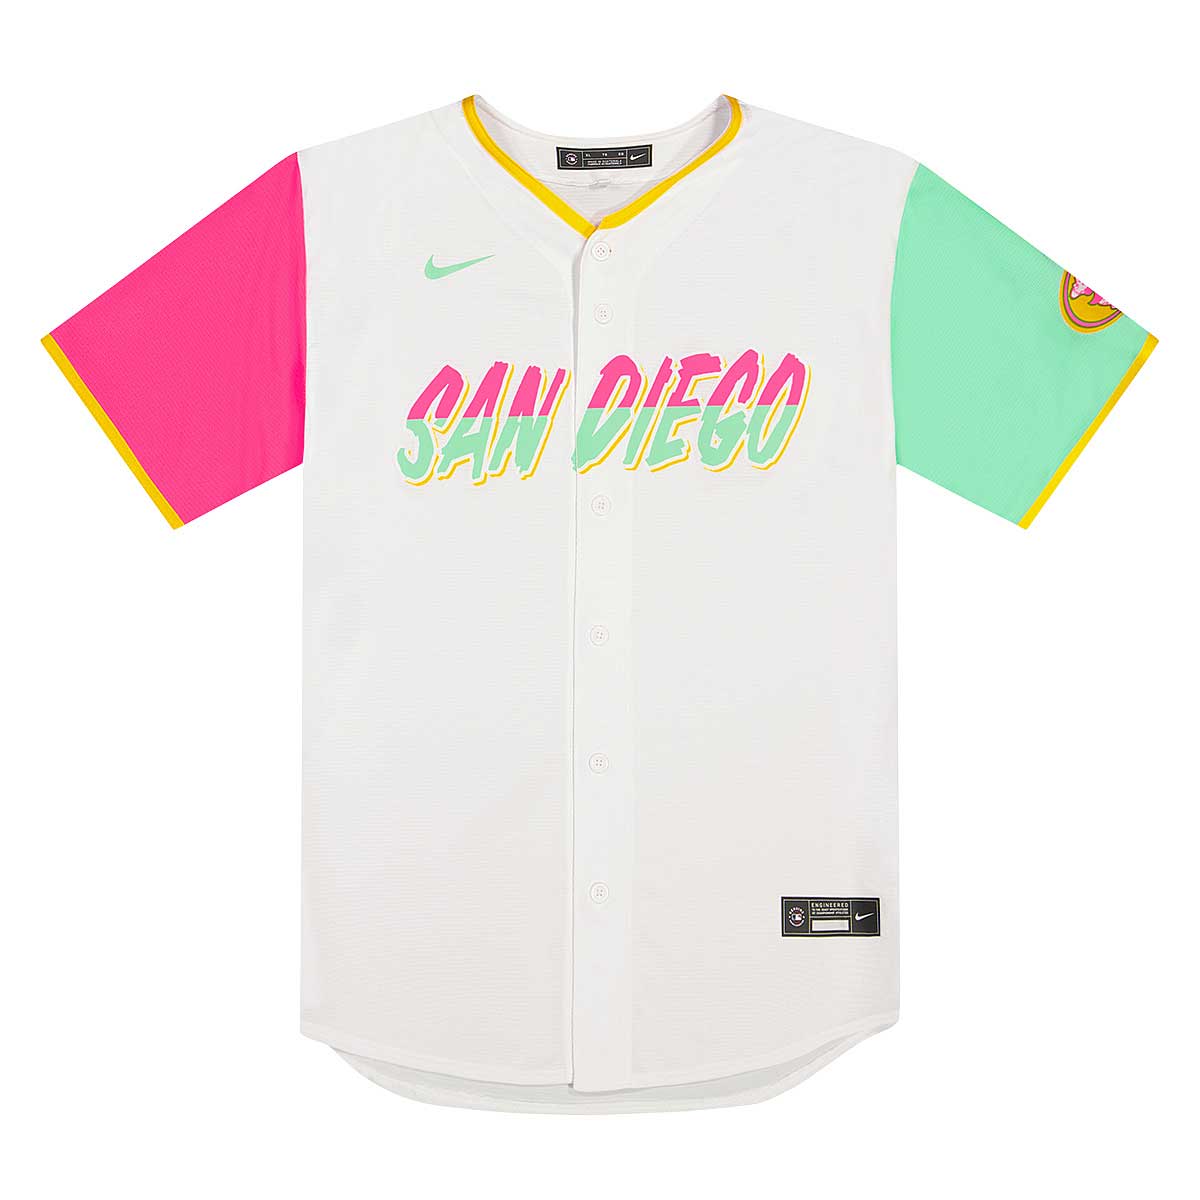 Buy MLB OFFICIAL REPLICA SAN DIEGO PADRES HOME JERSEY for EUR